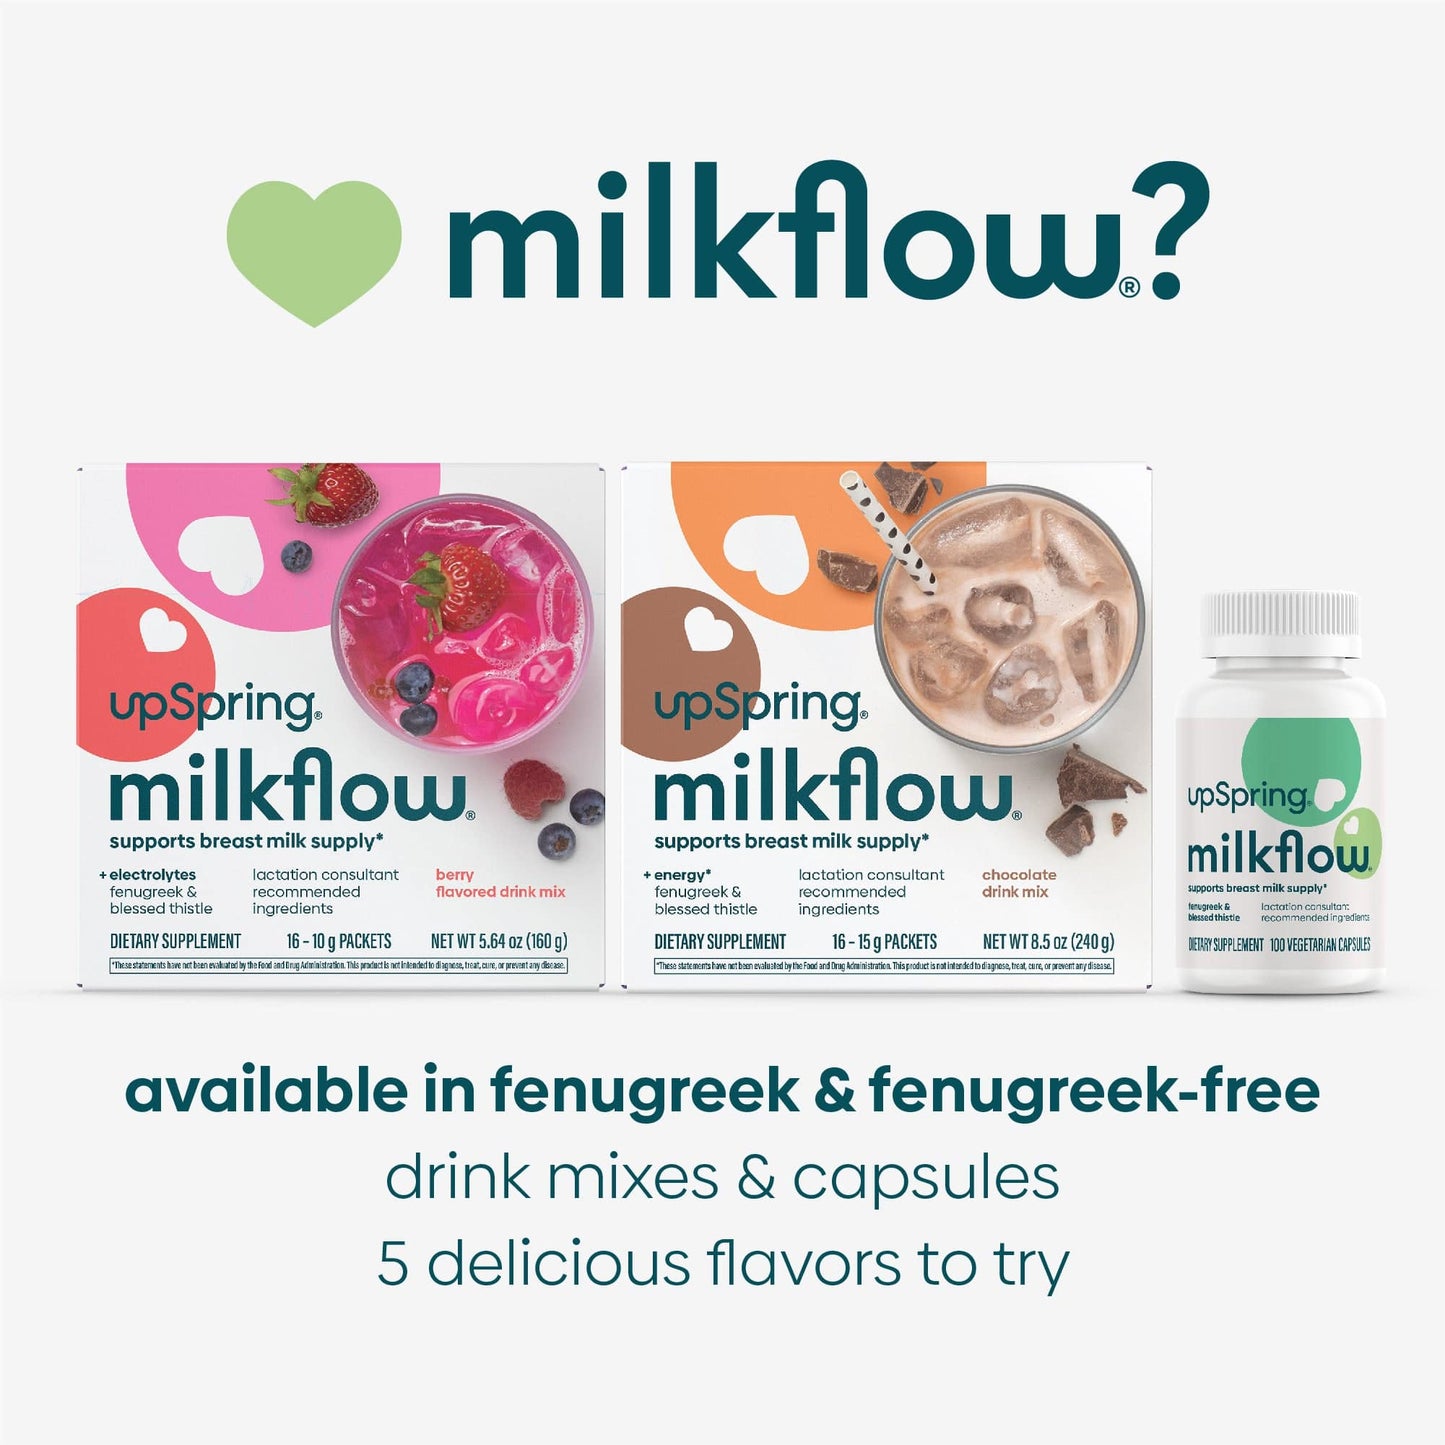 MilkFlow is available in a variety of flavors and varieties